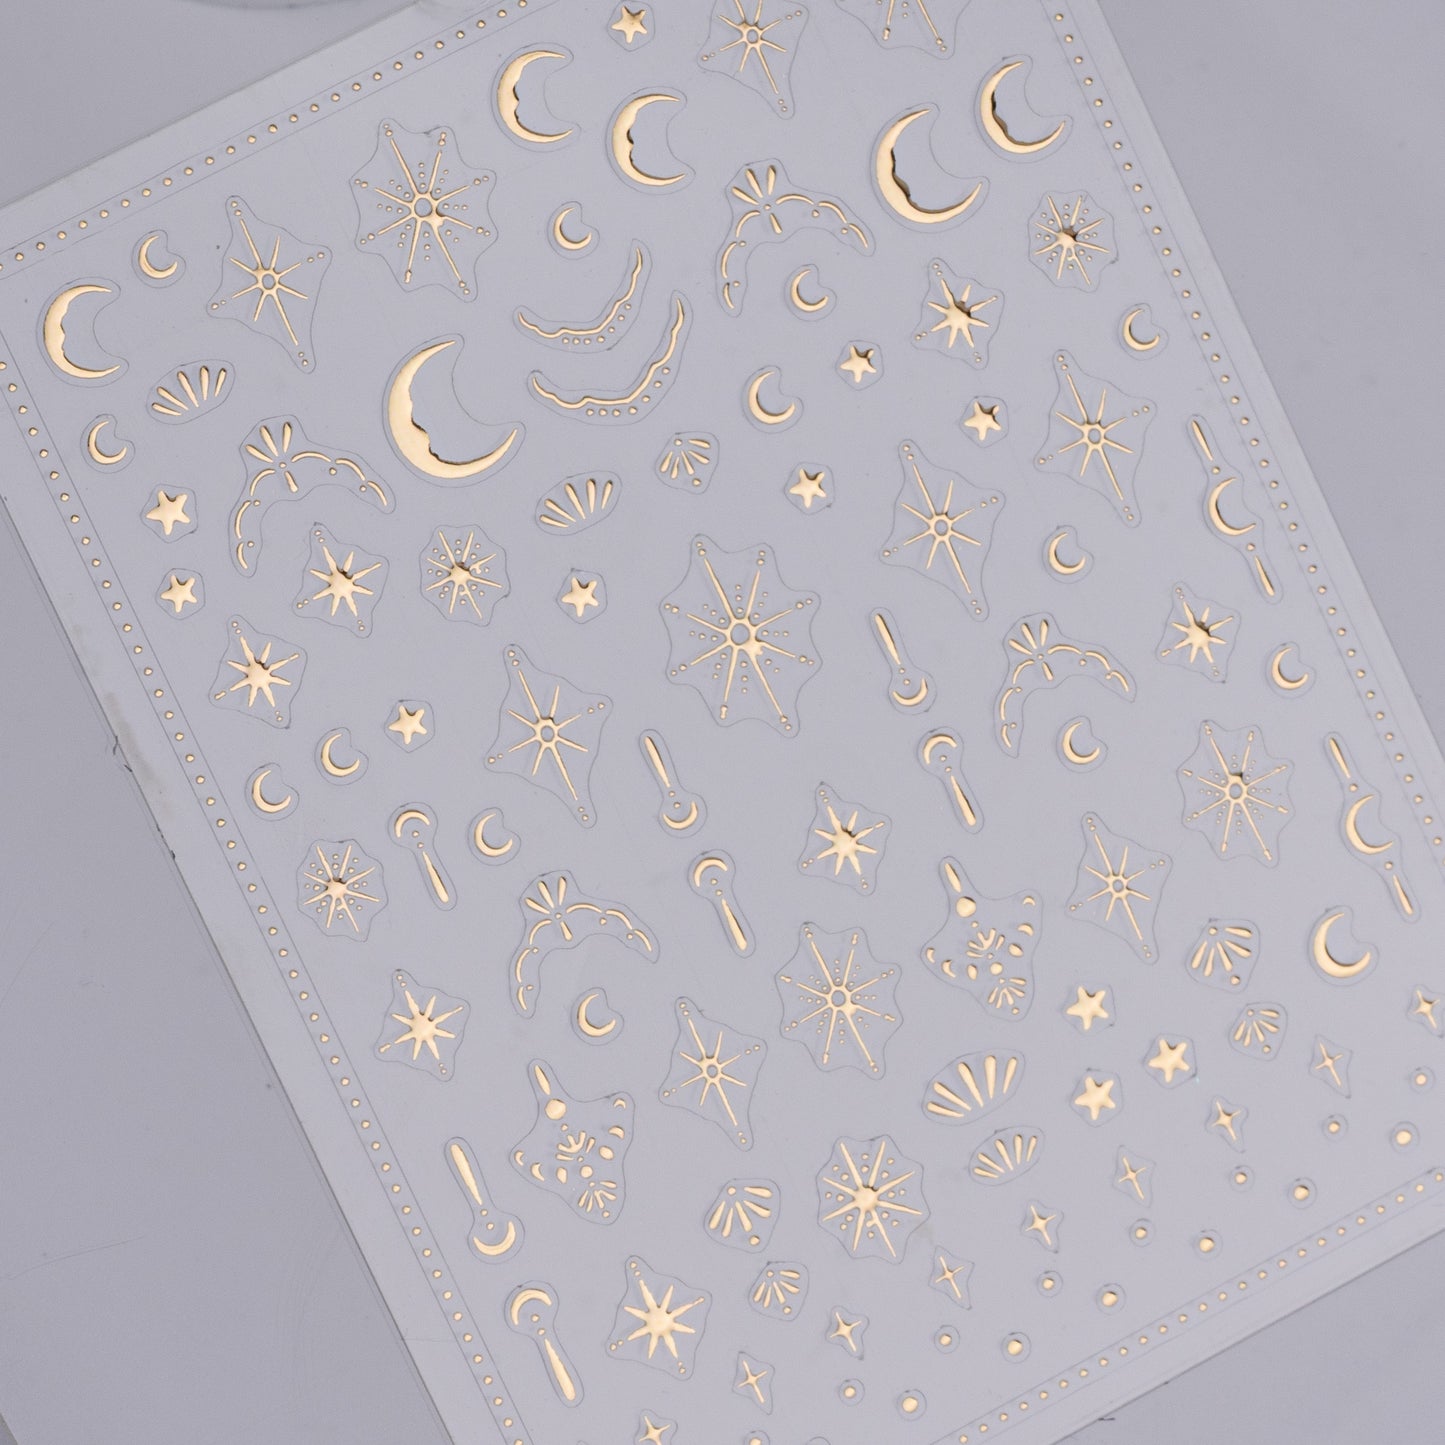 Celestial Nail Stickers (Gold)